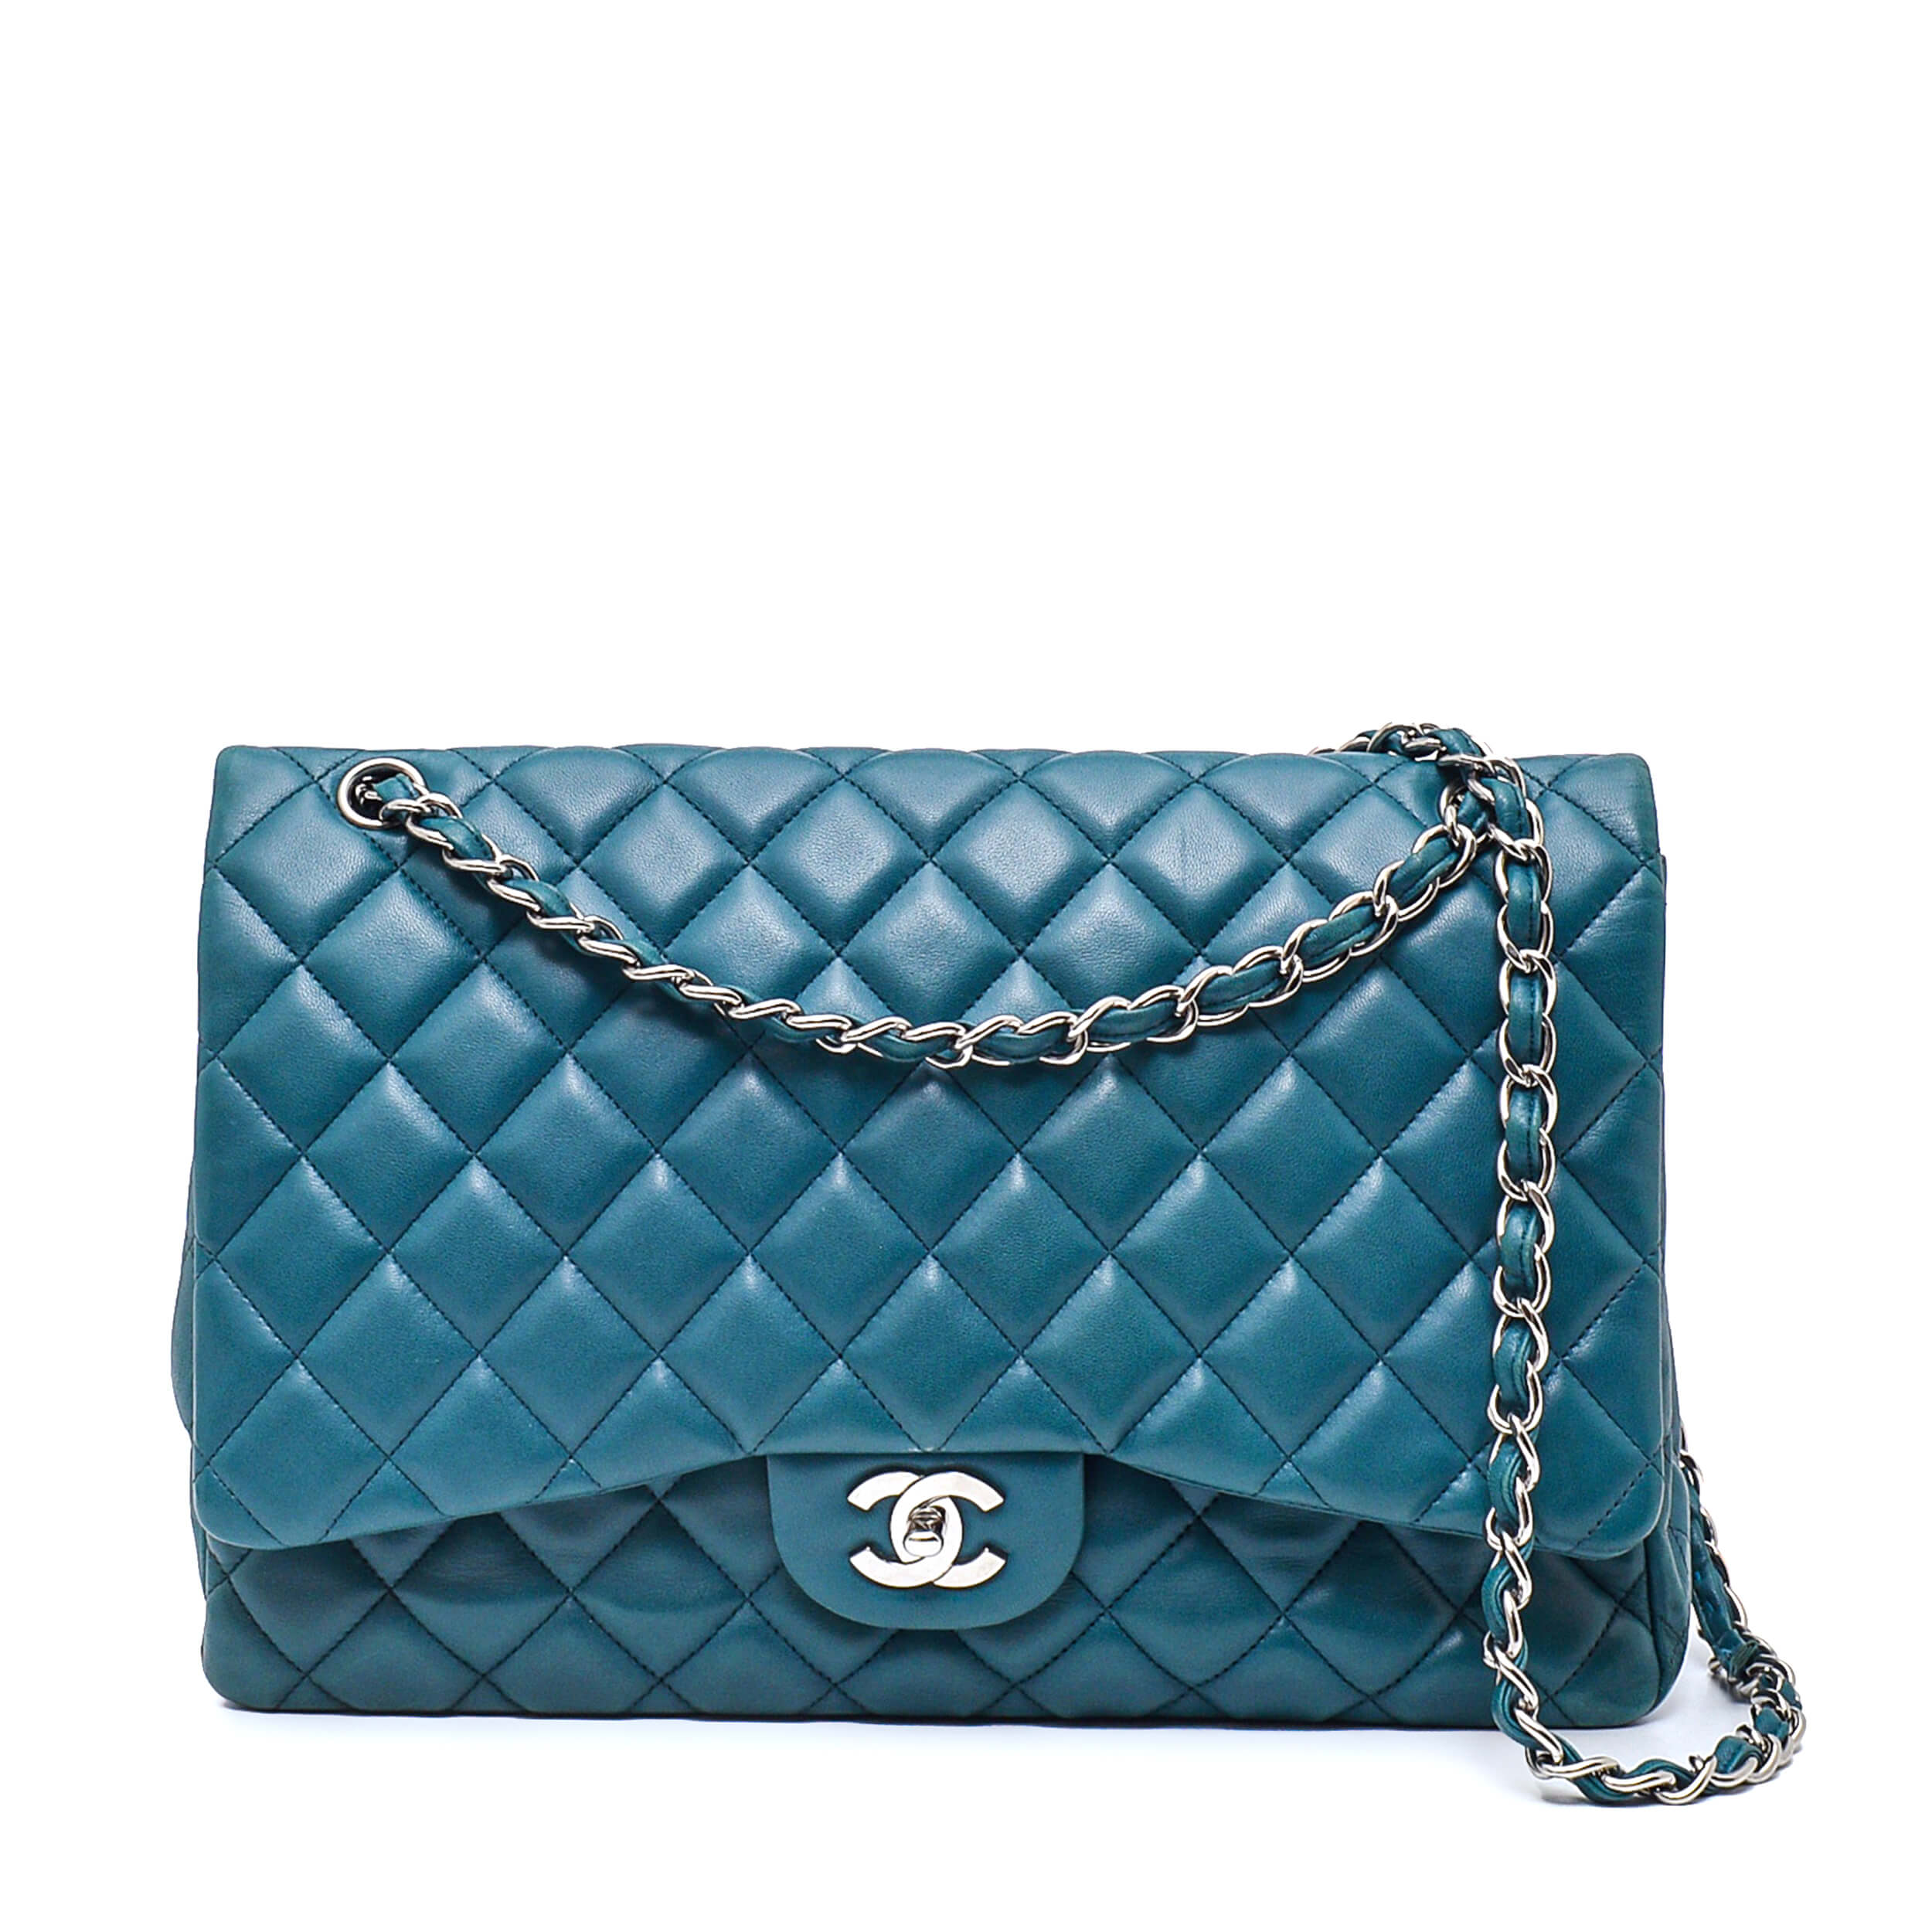 Chanel - Turquoise Quilted Lambskin Leather Maxi Jumbo Single Flap Bag